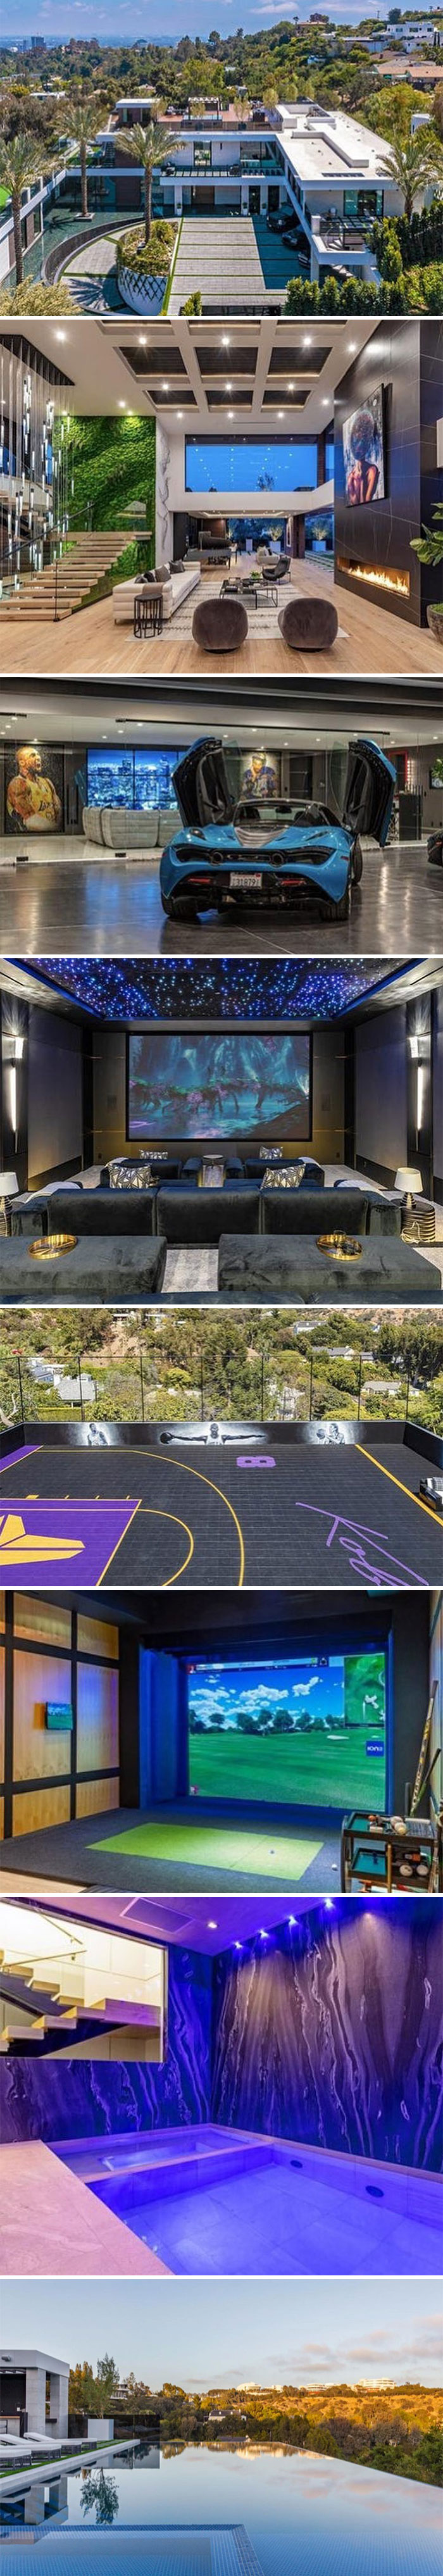 This Home Is Called “The Brentwood Oasis” And It Recently Sold For $44,000,000